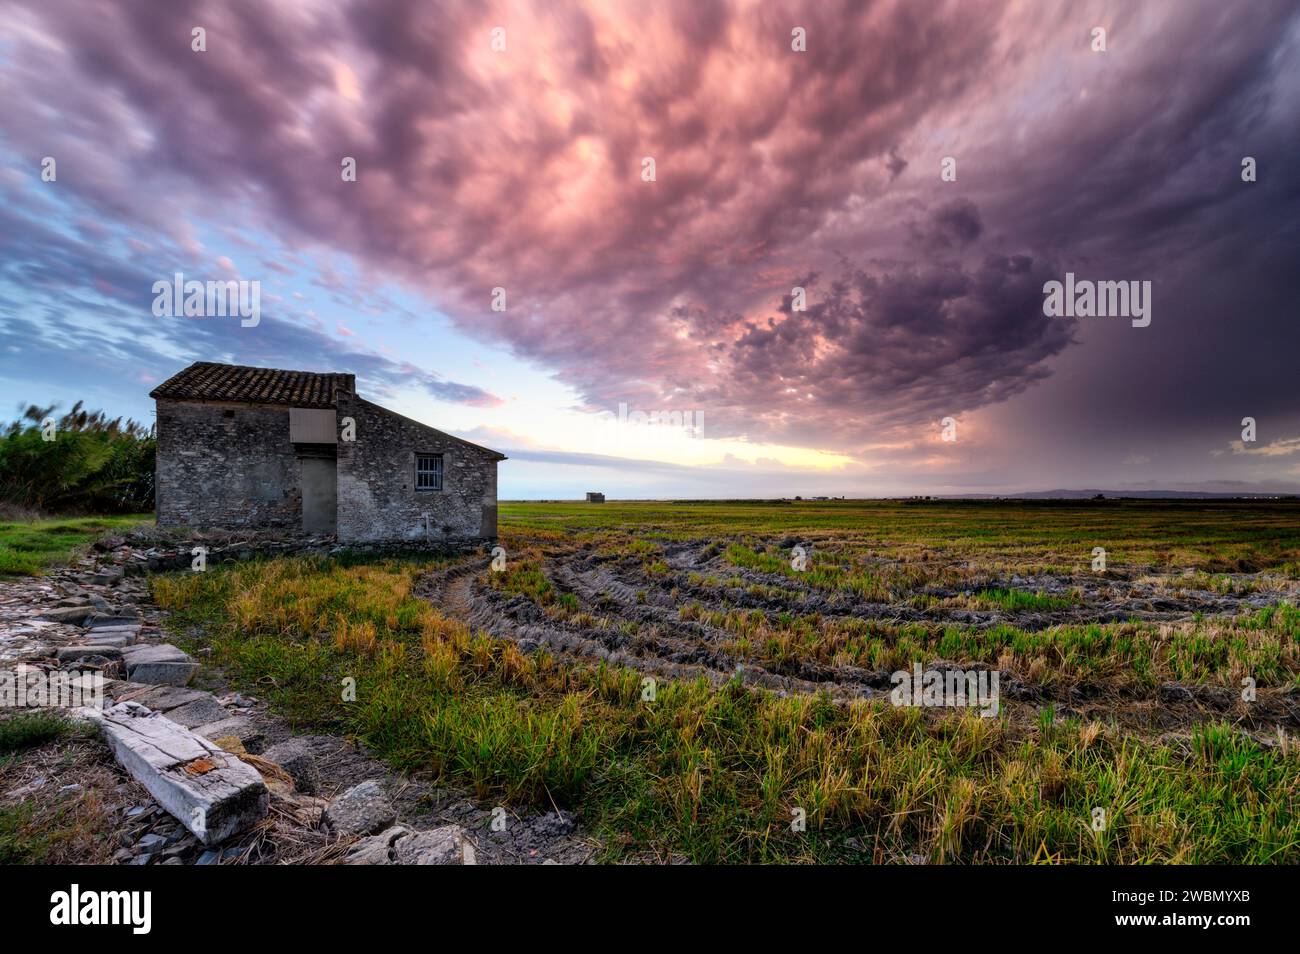 Sunset in the green rice fields near Valencia, Spain, with a rural cottage and spectacular stormy sky. Stock Photo